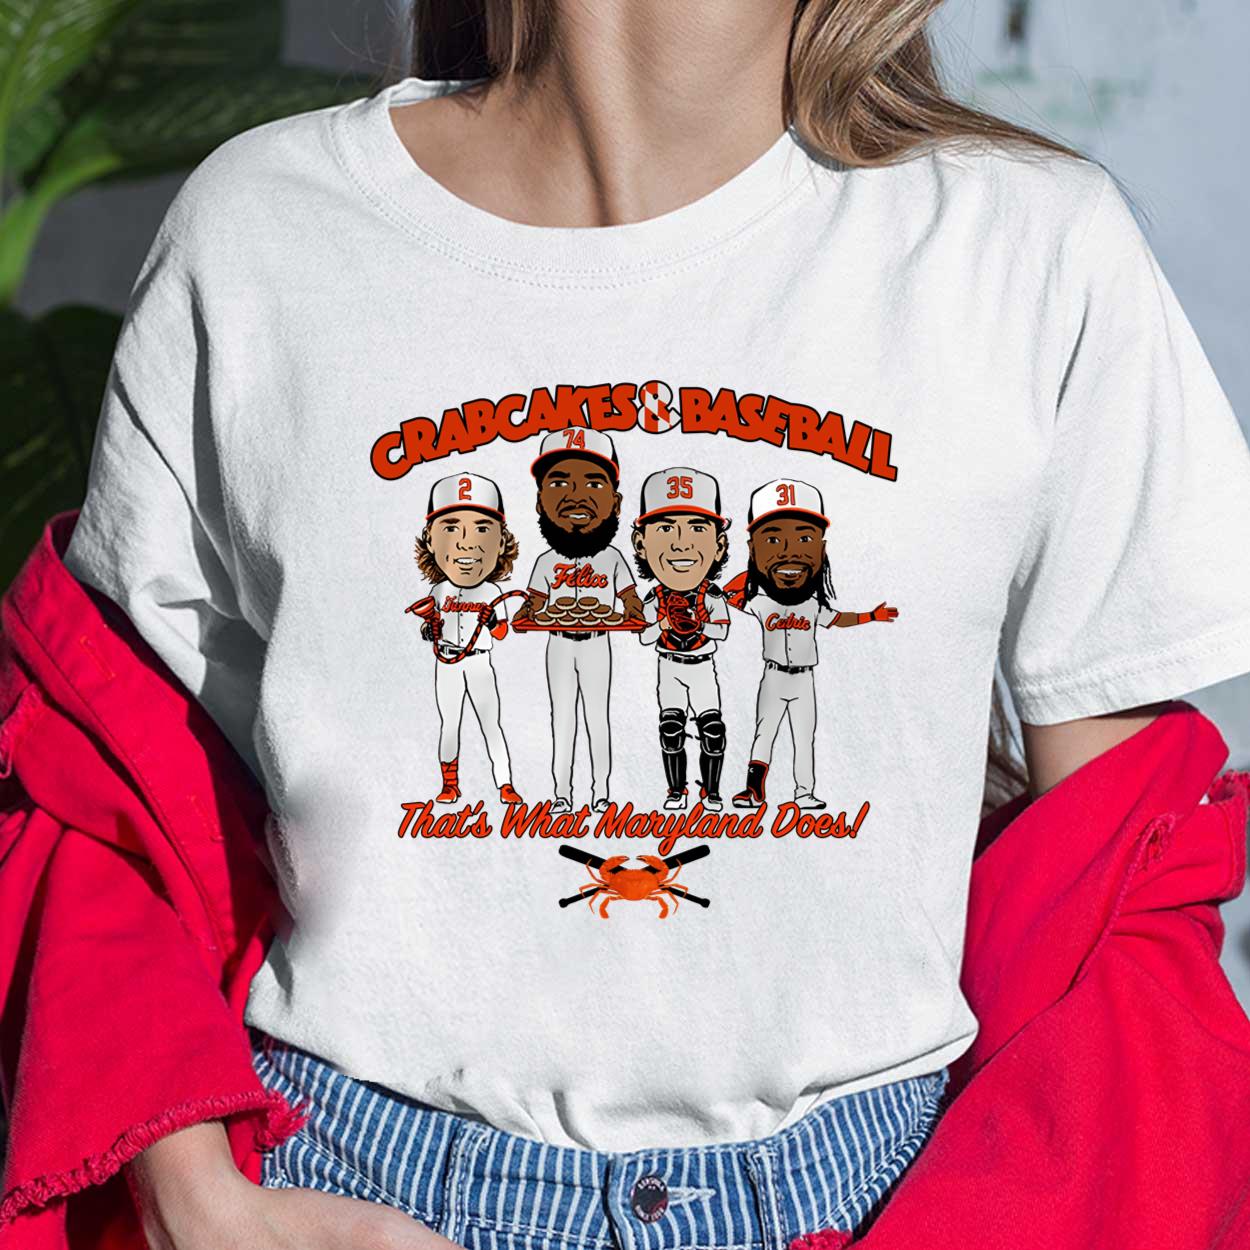 Orioles Crab Cakes And Baseball That's What Maryland Does Shirt, Hoodie,  Women Tee, Sweatshirt - Lelemoon